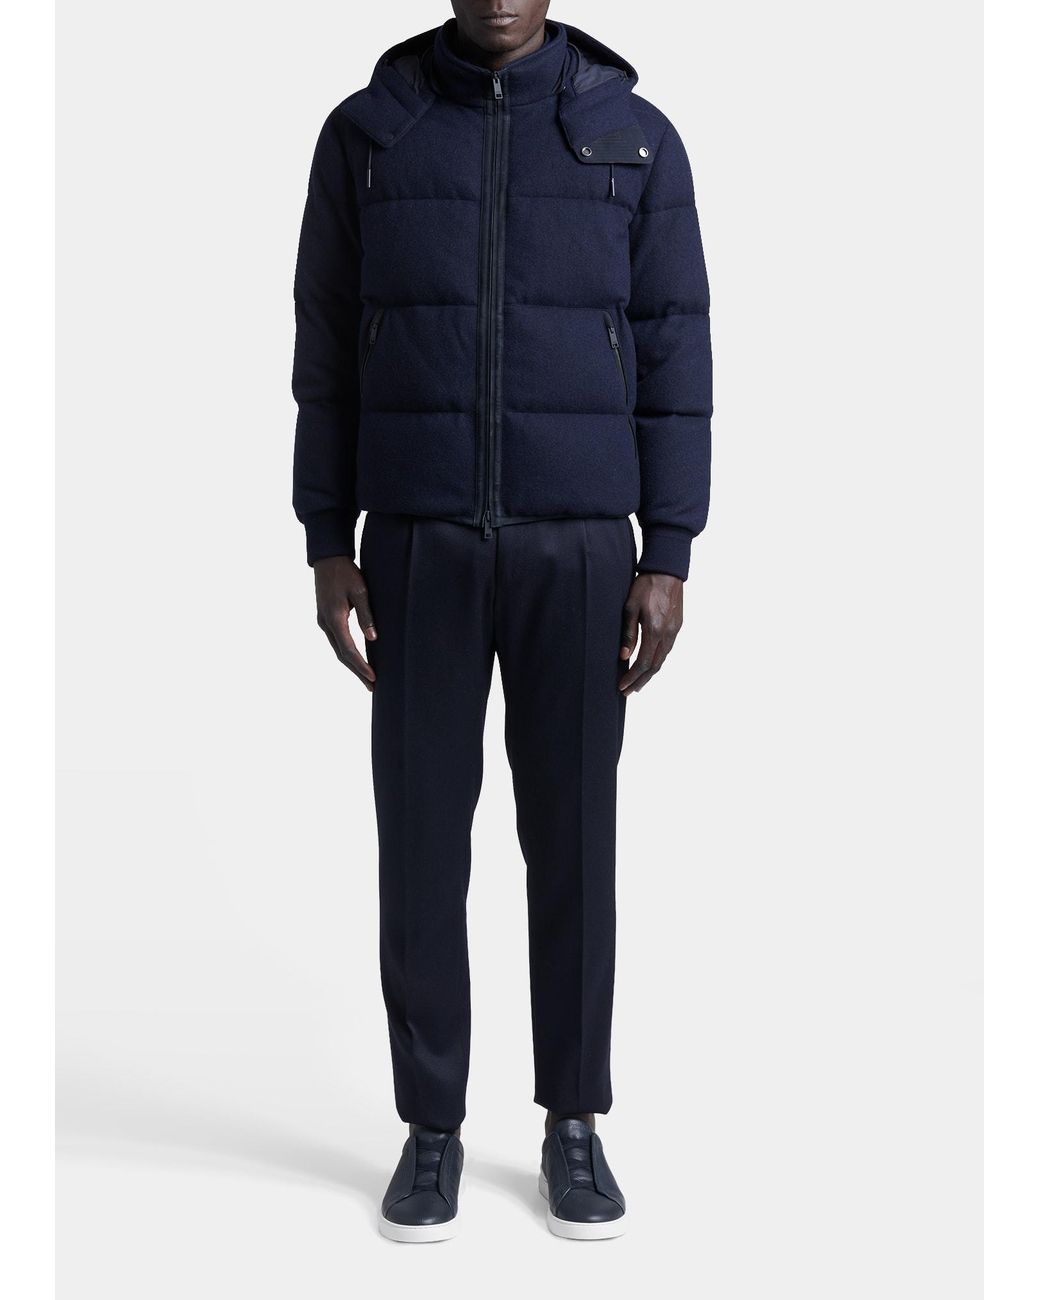 Zegna Water-repellent Cashmere Hooded Puffer Jacket in Blue for Men | Lyst